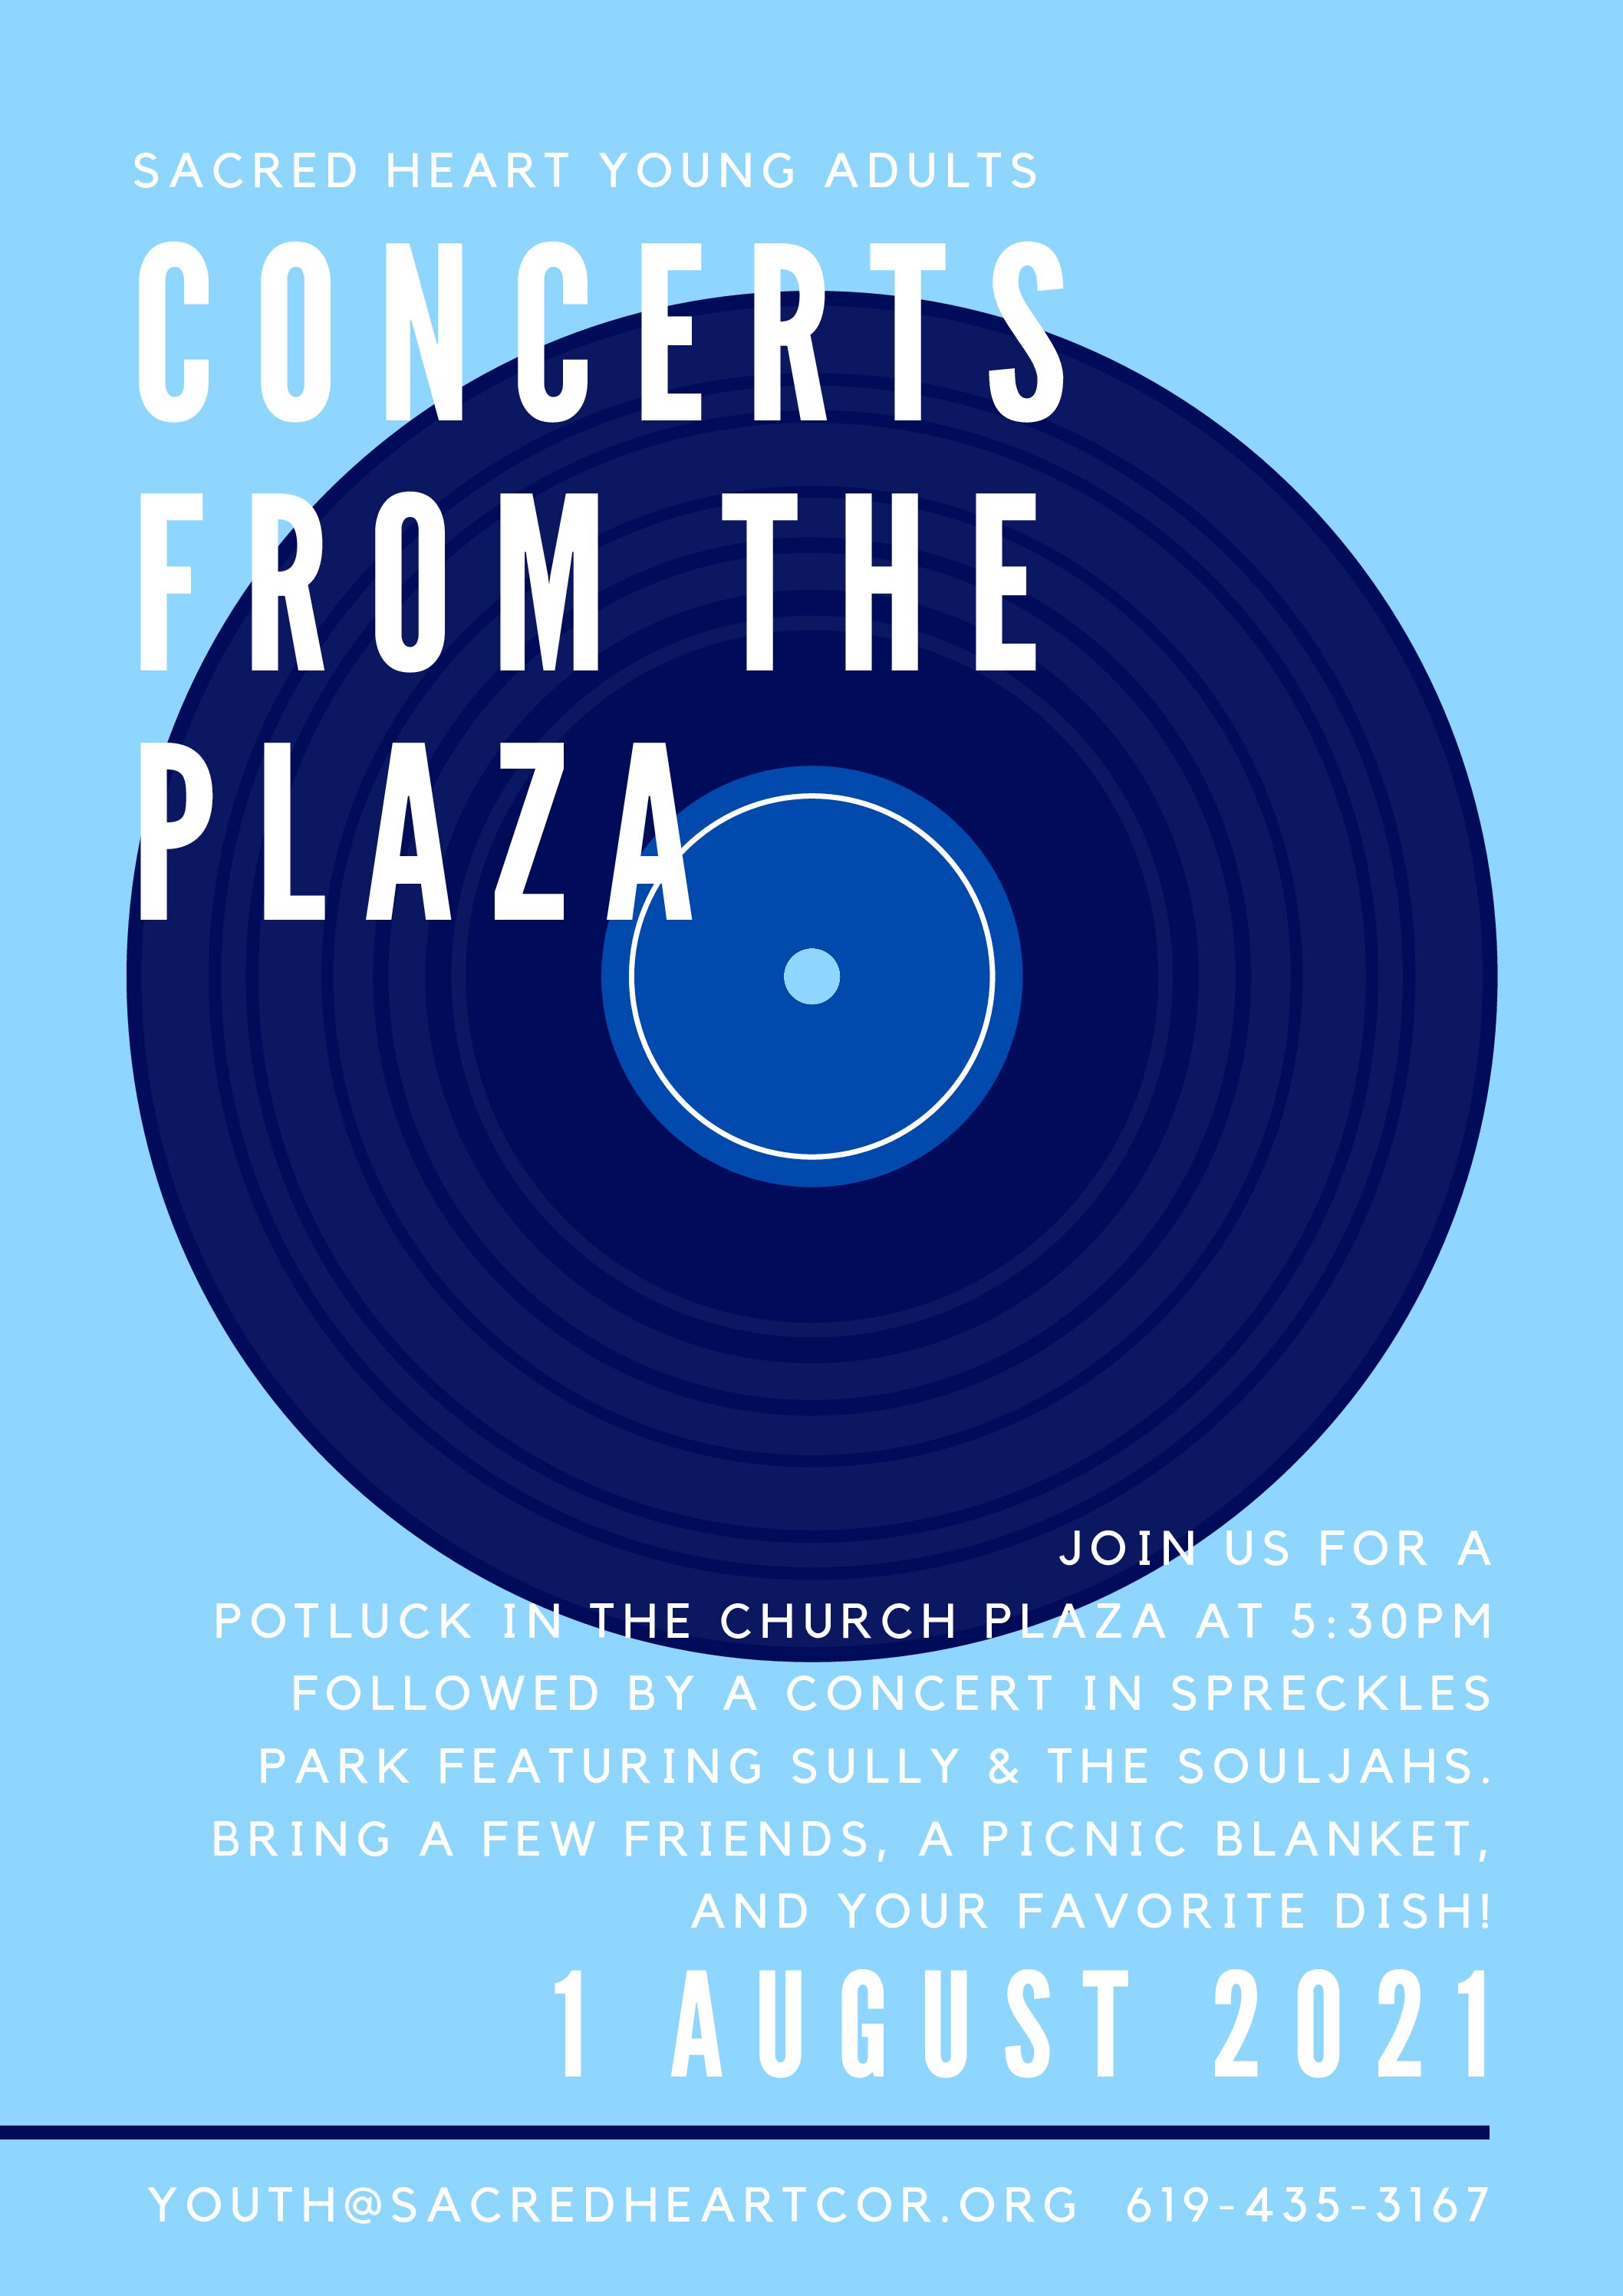 Young Adults Concerts from the Plaza Potluck